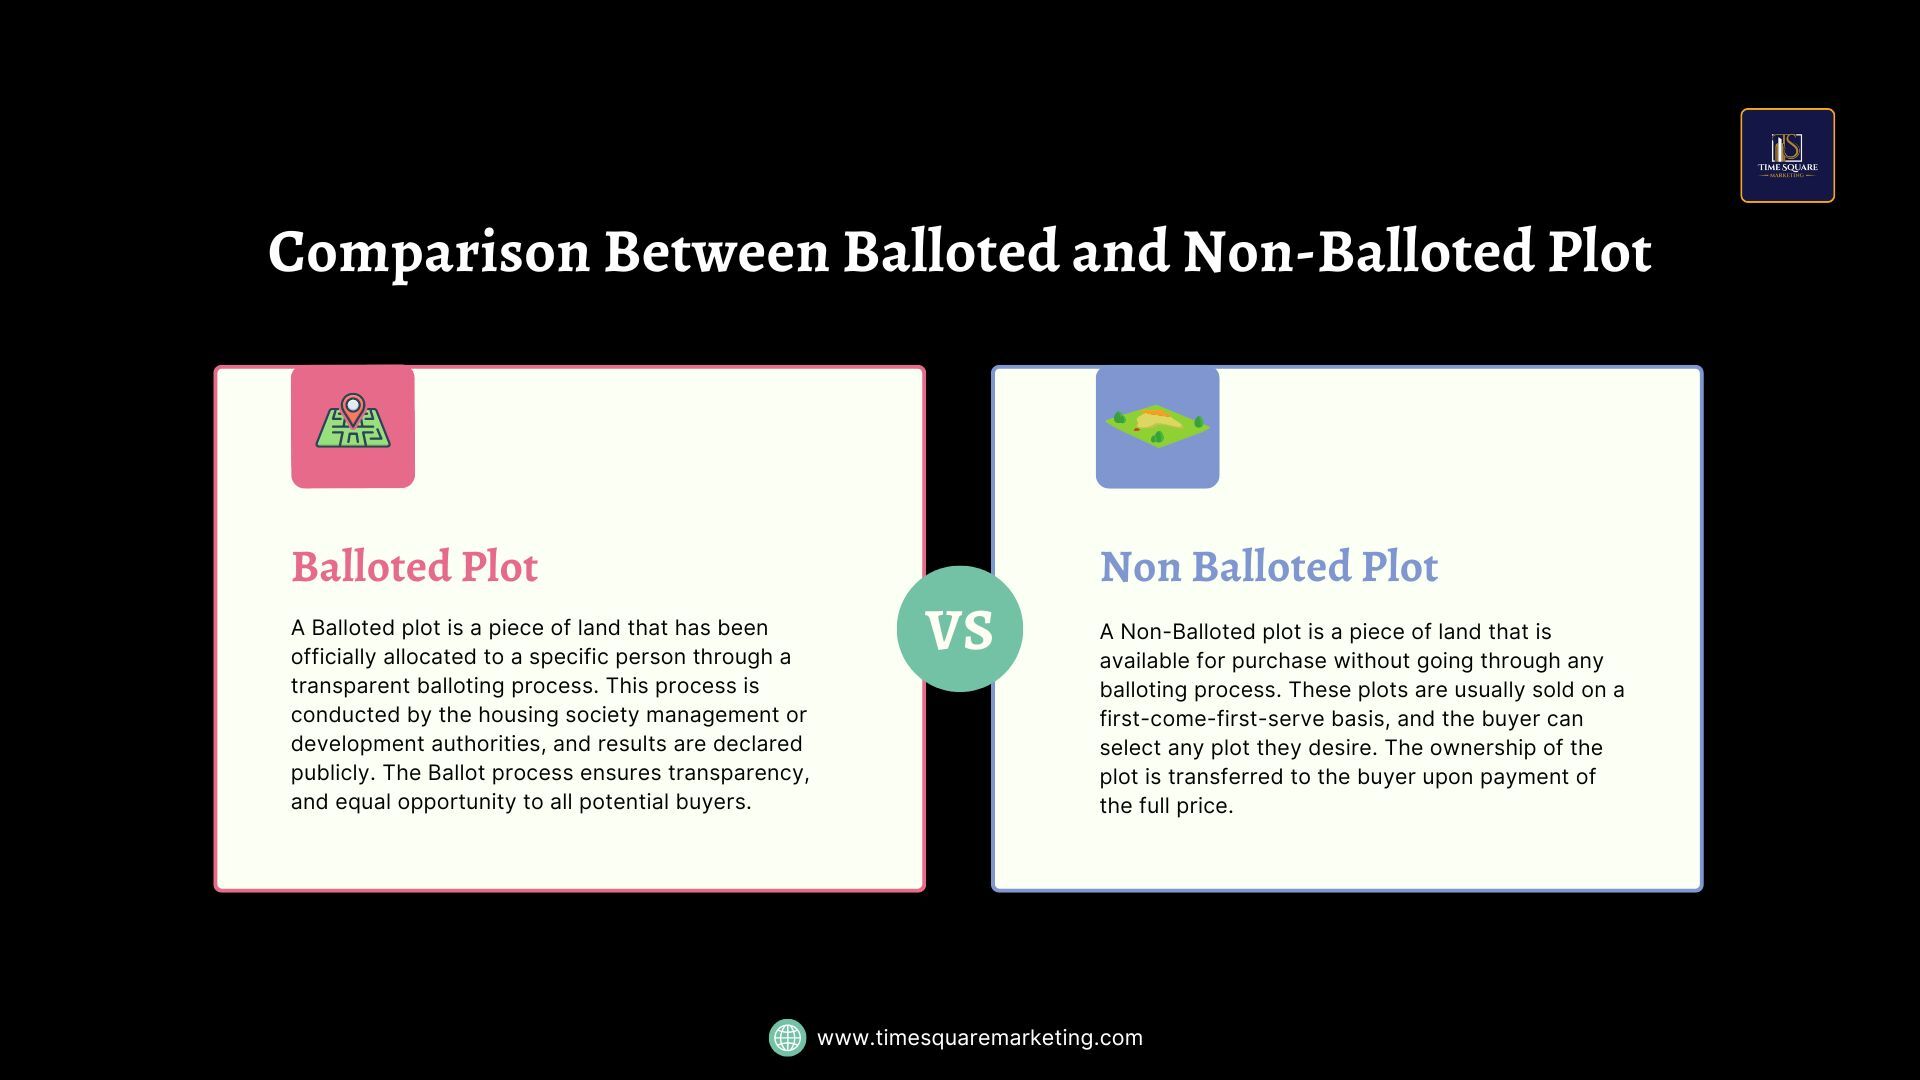 Comparison between Balloted and Non-Balloted Plots